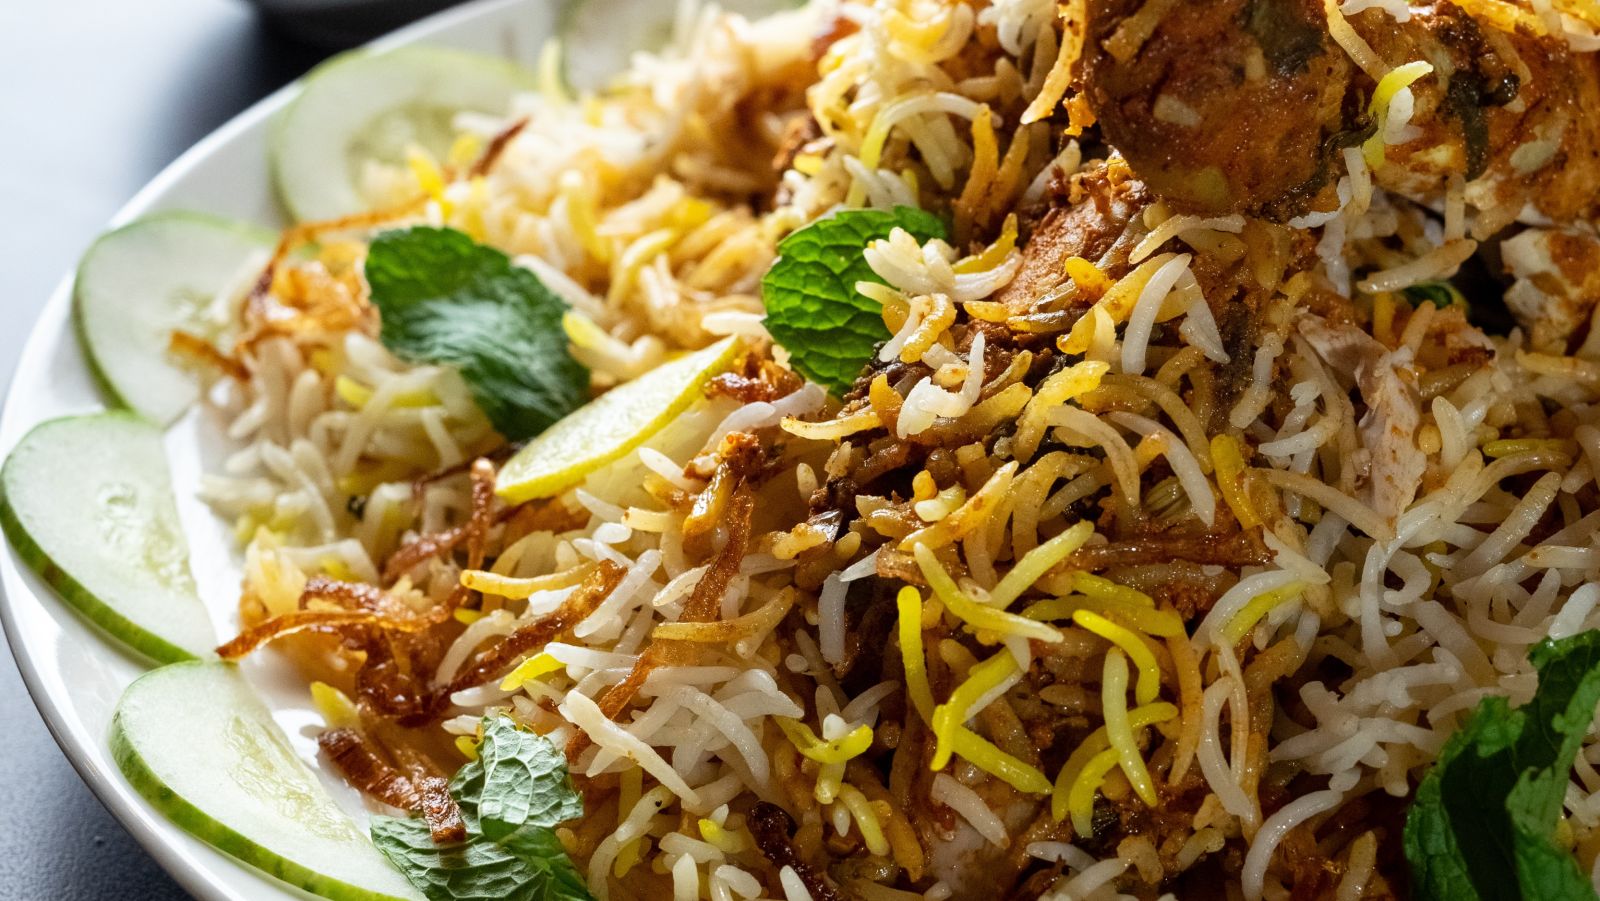 Biryani served in a plate with curd and curry in small bowls